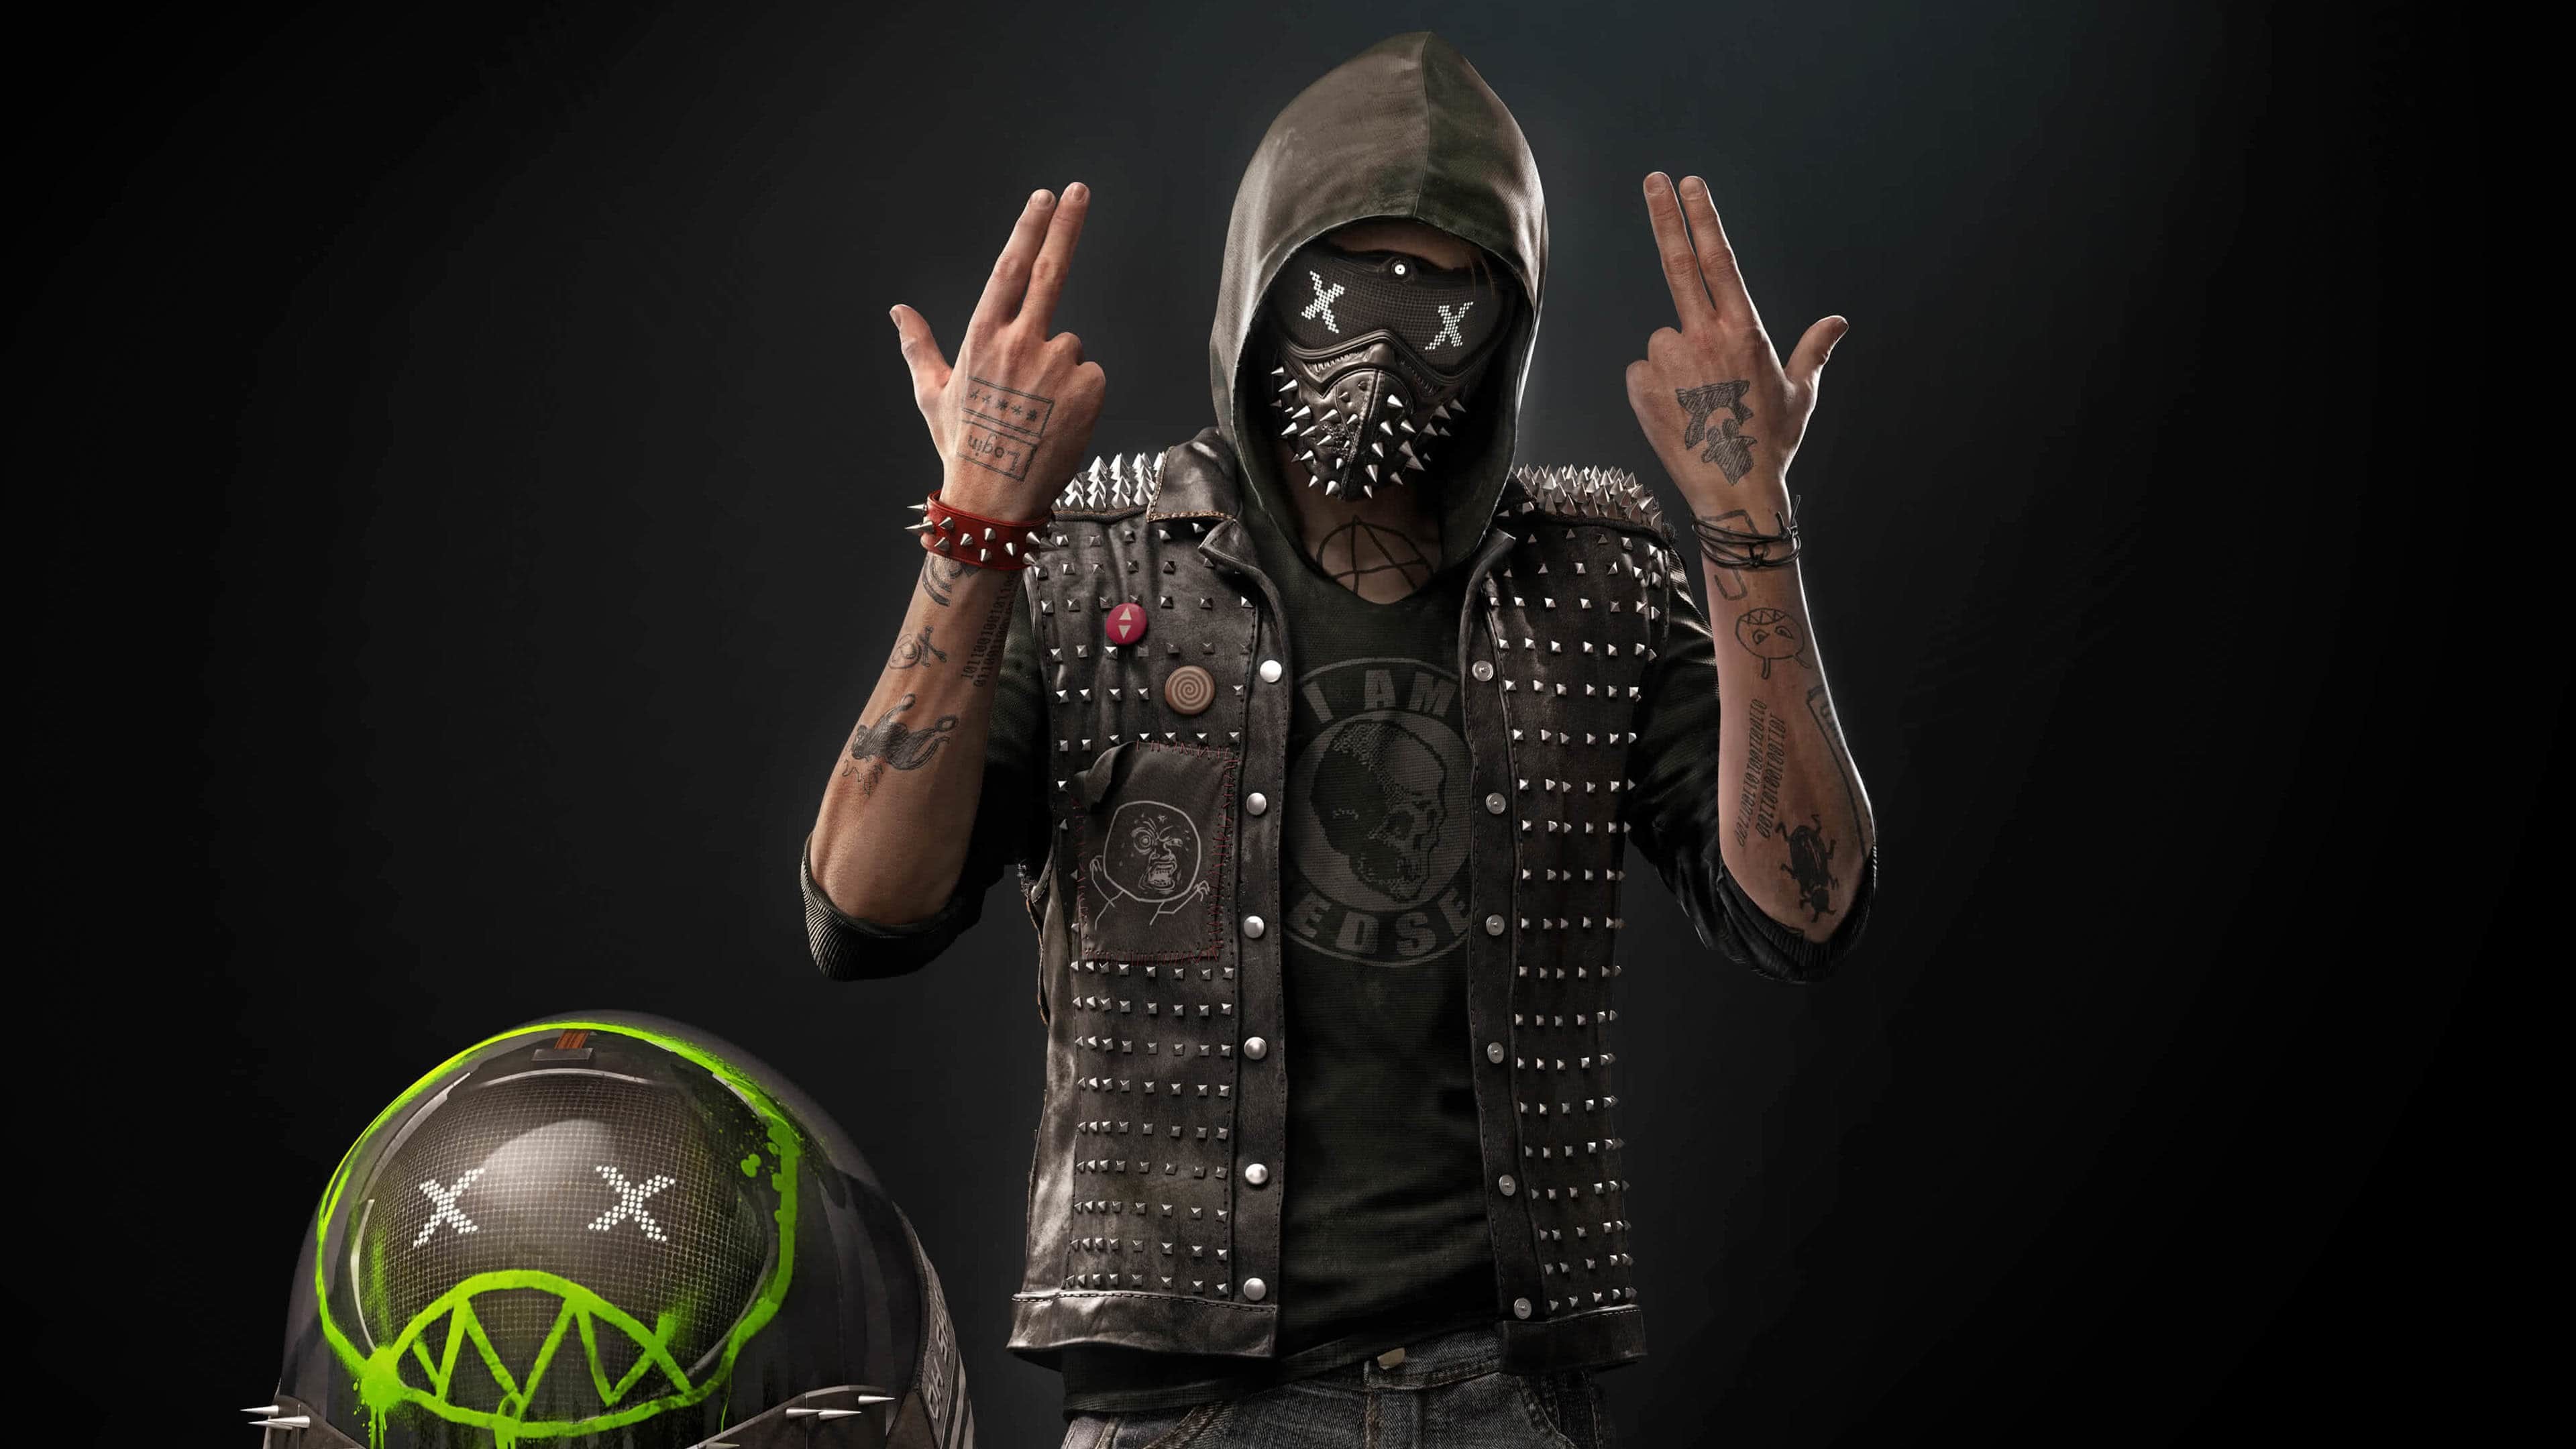 3840x2160 Related Images. watch dogs 2 uhd 4k wallpaper